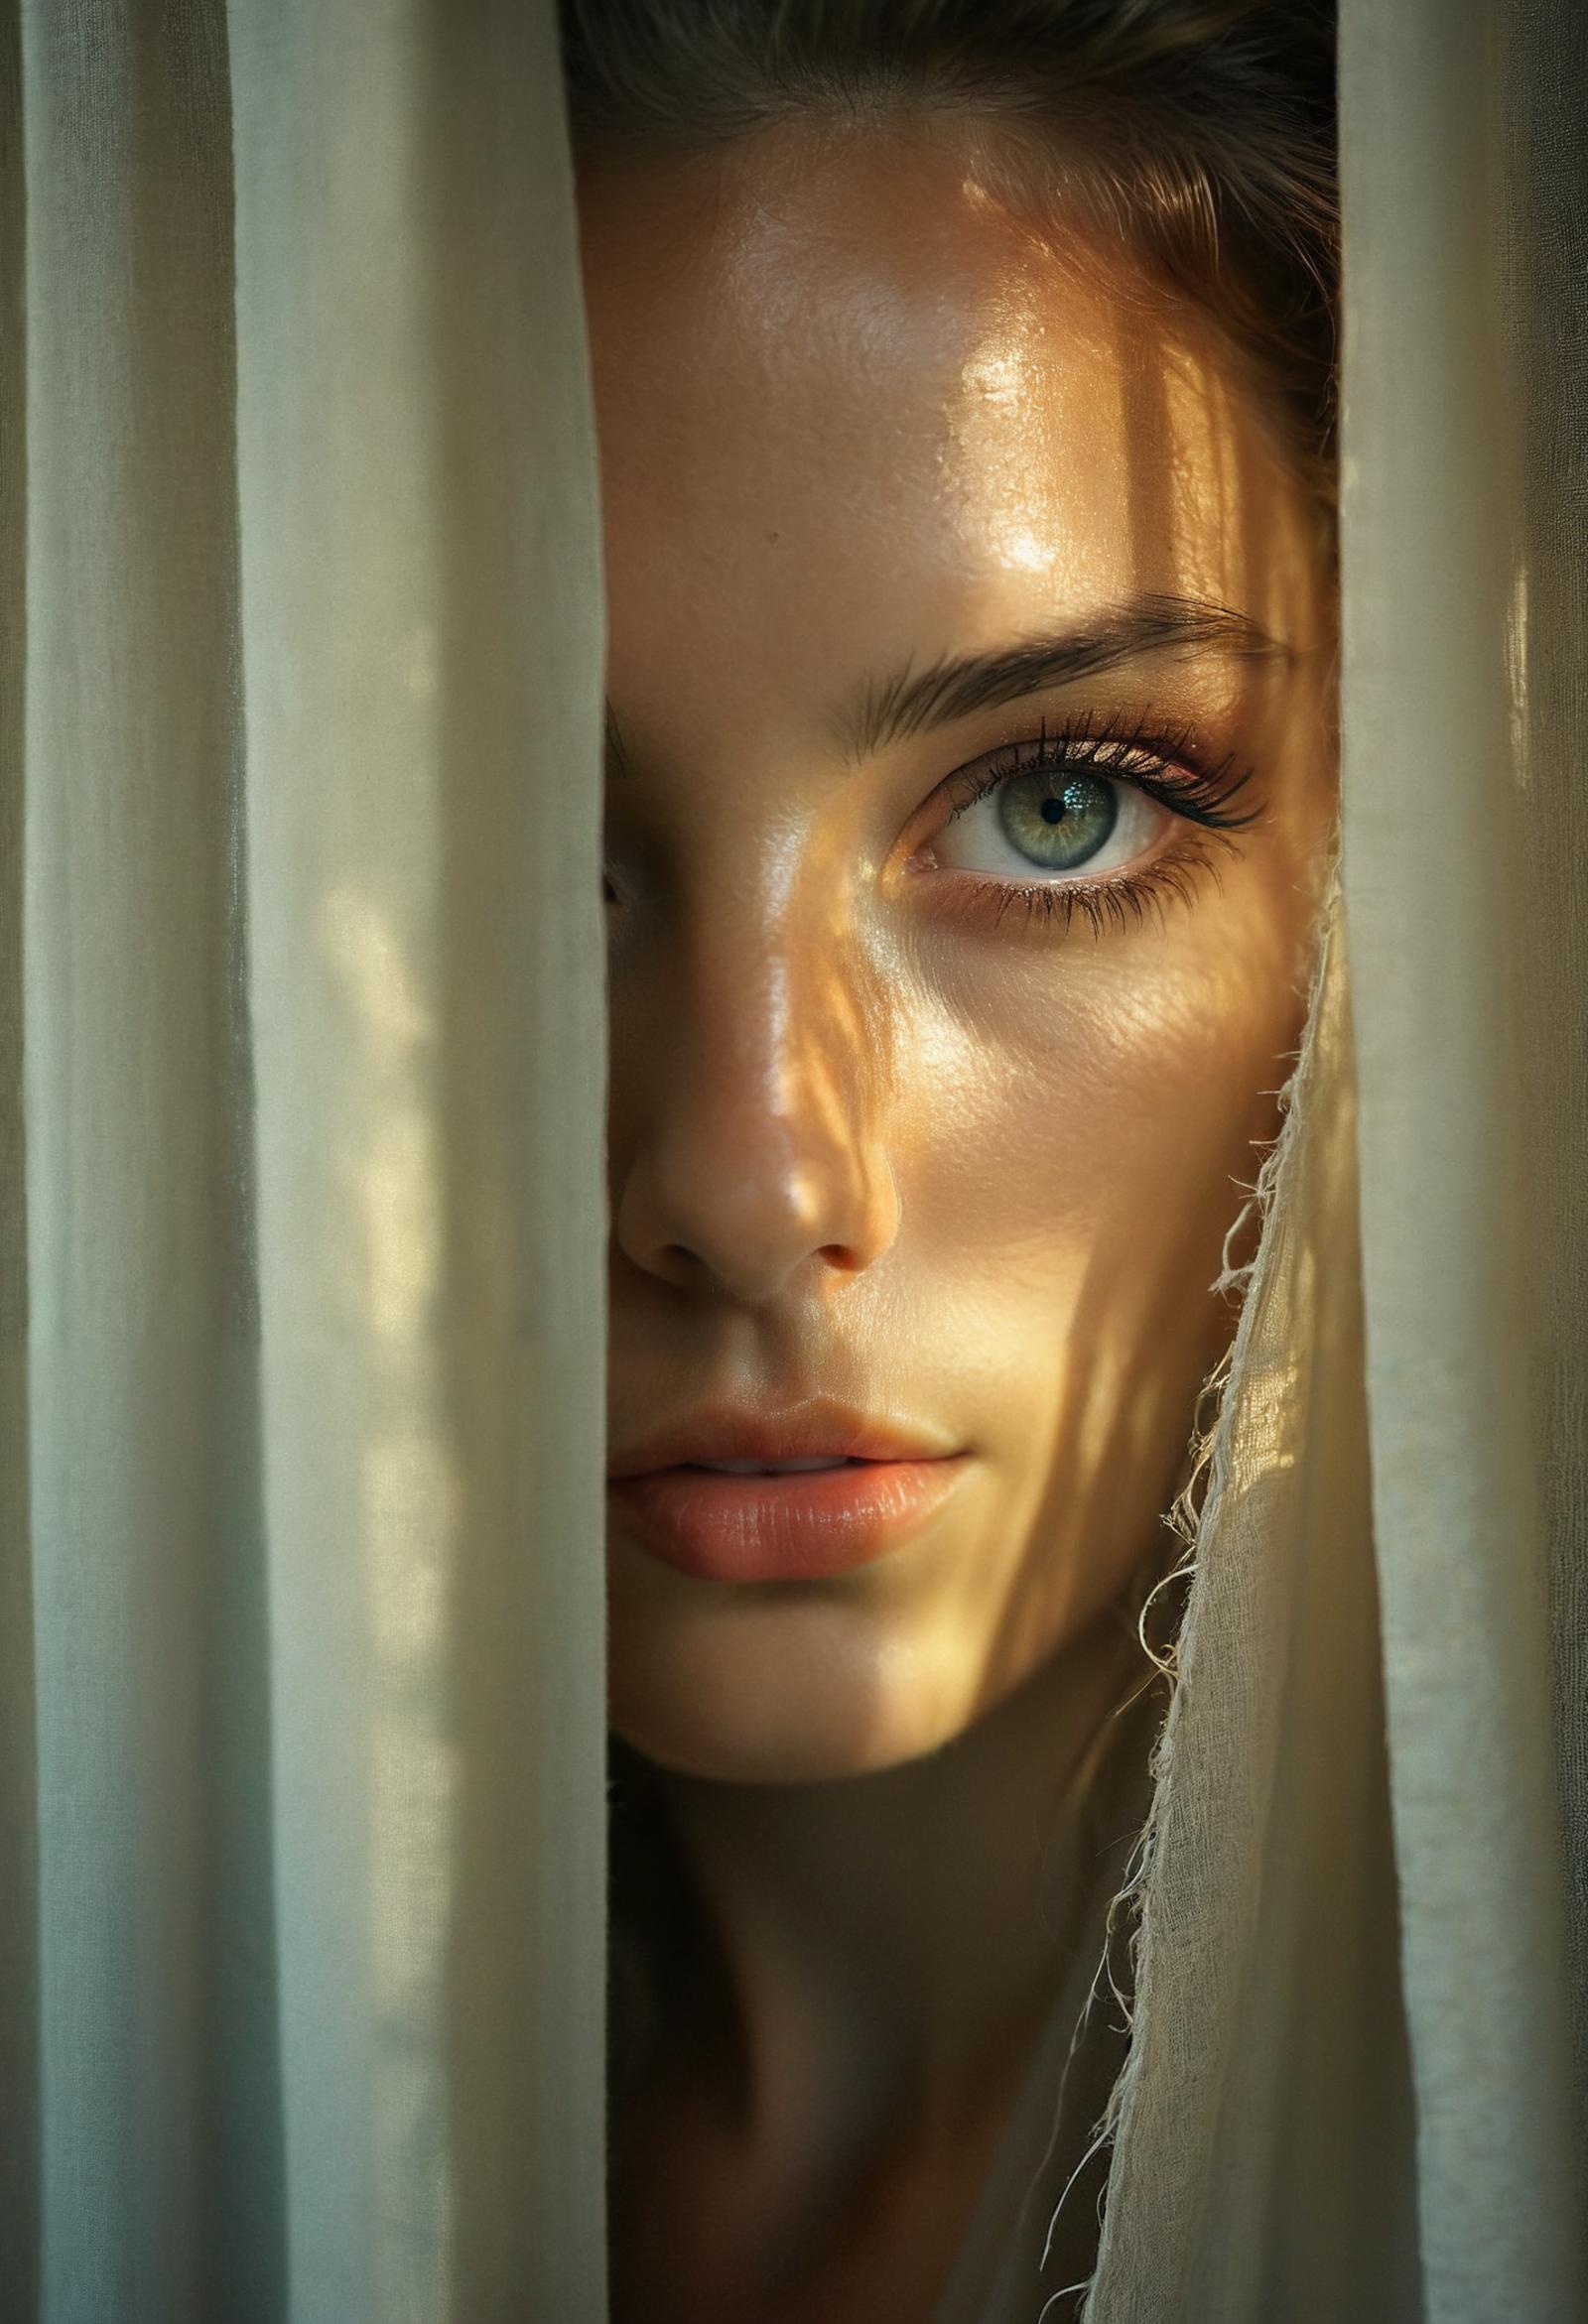 A woman with blue eyes peeking out from behind a curtain.